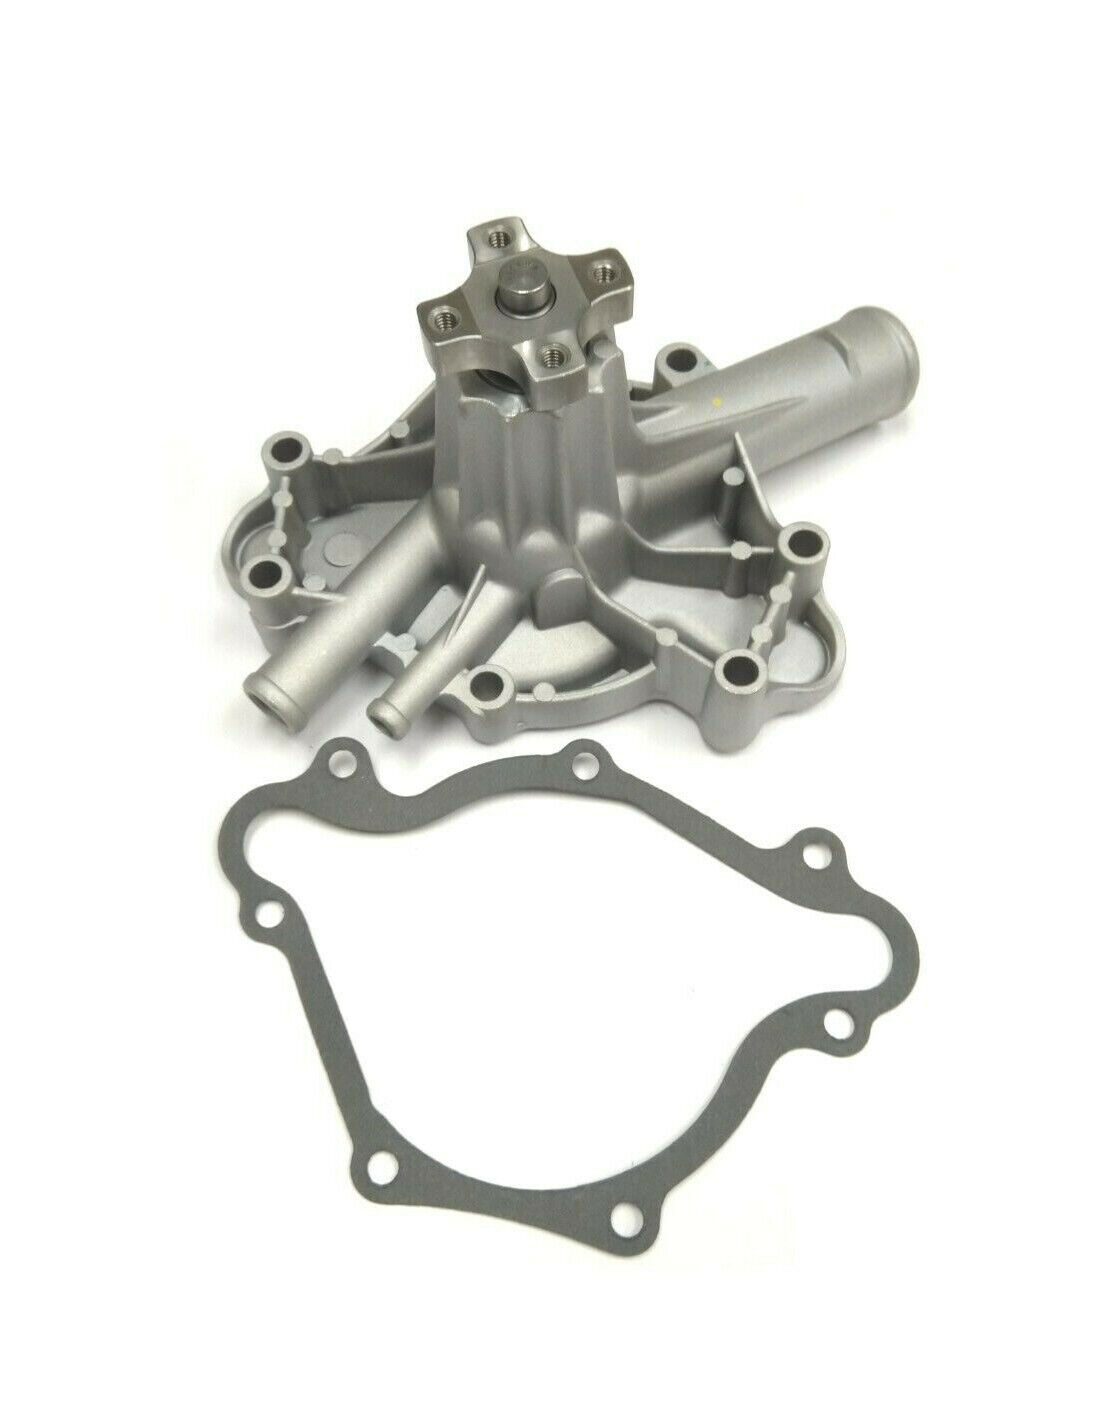 OAW Water Pump CR1070 for 76-92 Chrysler Dodge Plymouth Small Block 318 360 cid